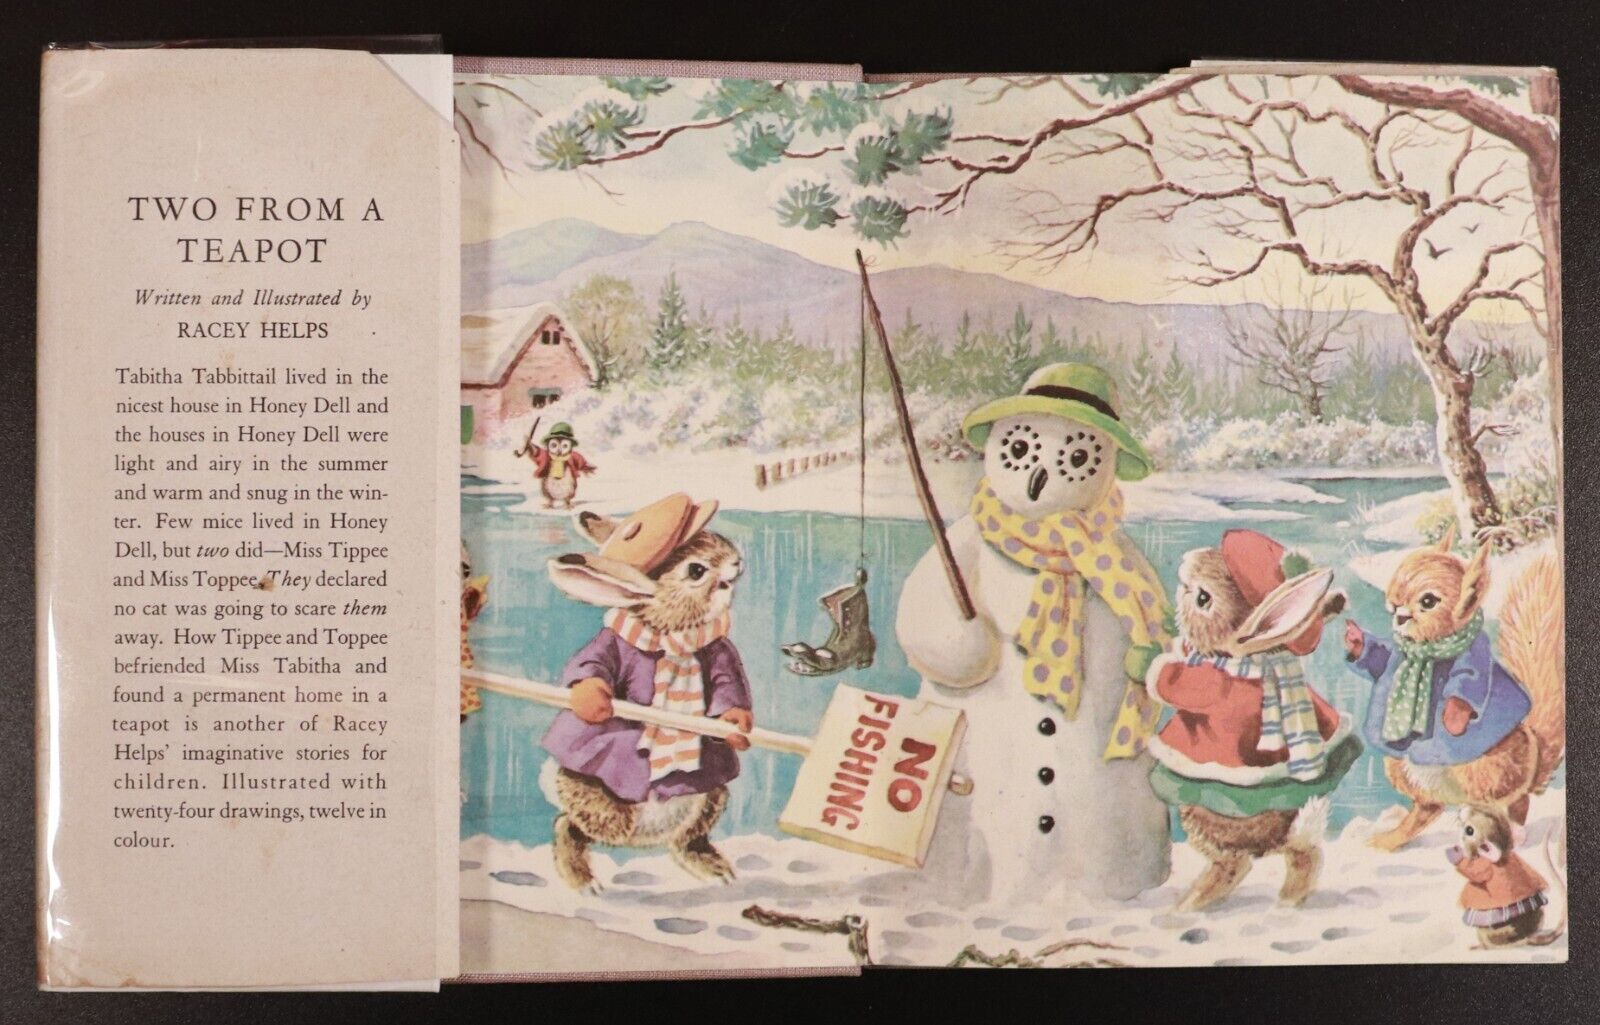 1967 Two From A Teapot by Racey Helps Vintage Illustrated Childrens Book - 0